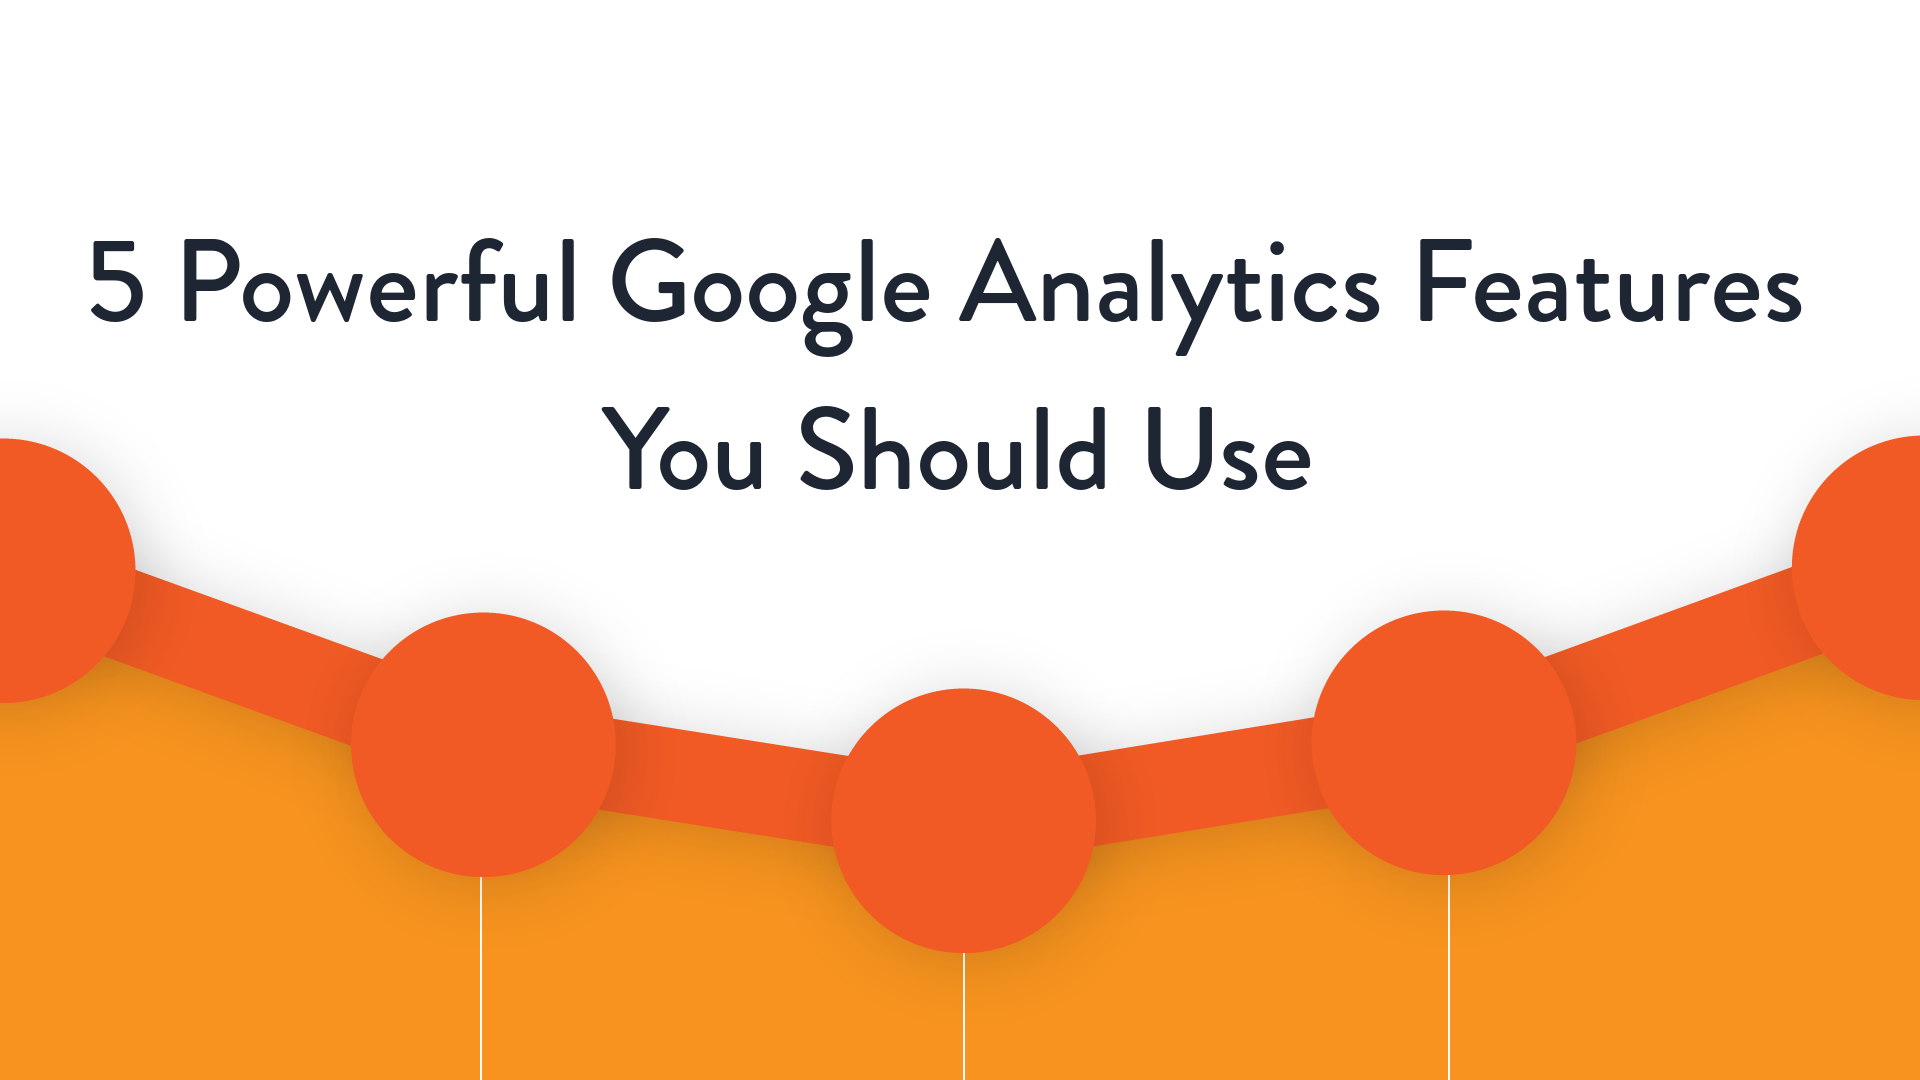 5 Powerful Google Analytics Features You Should Use